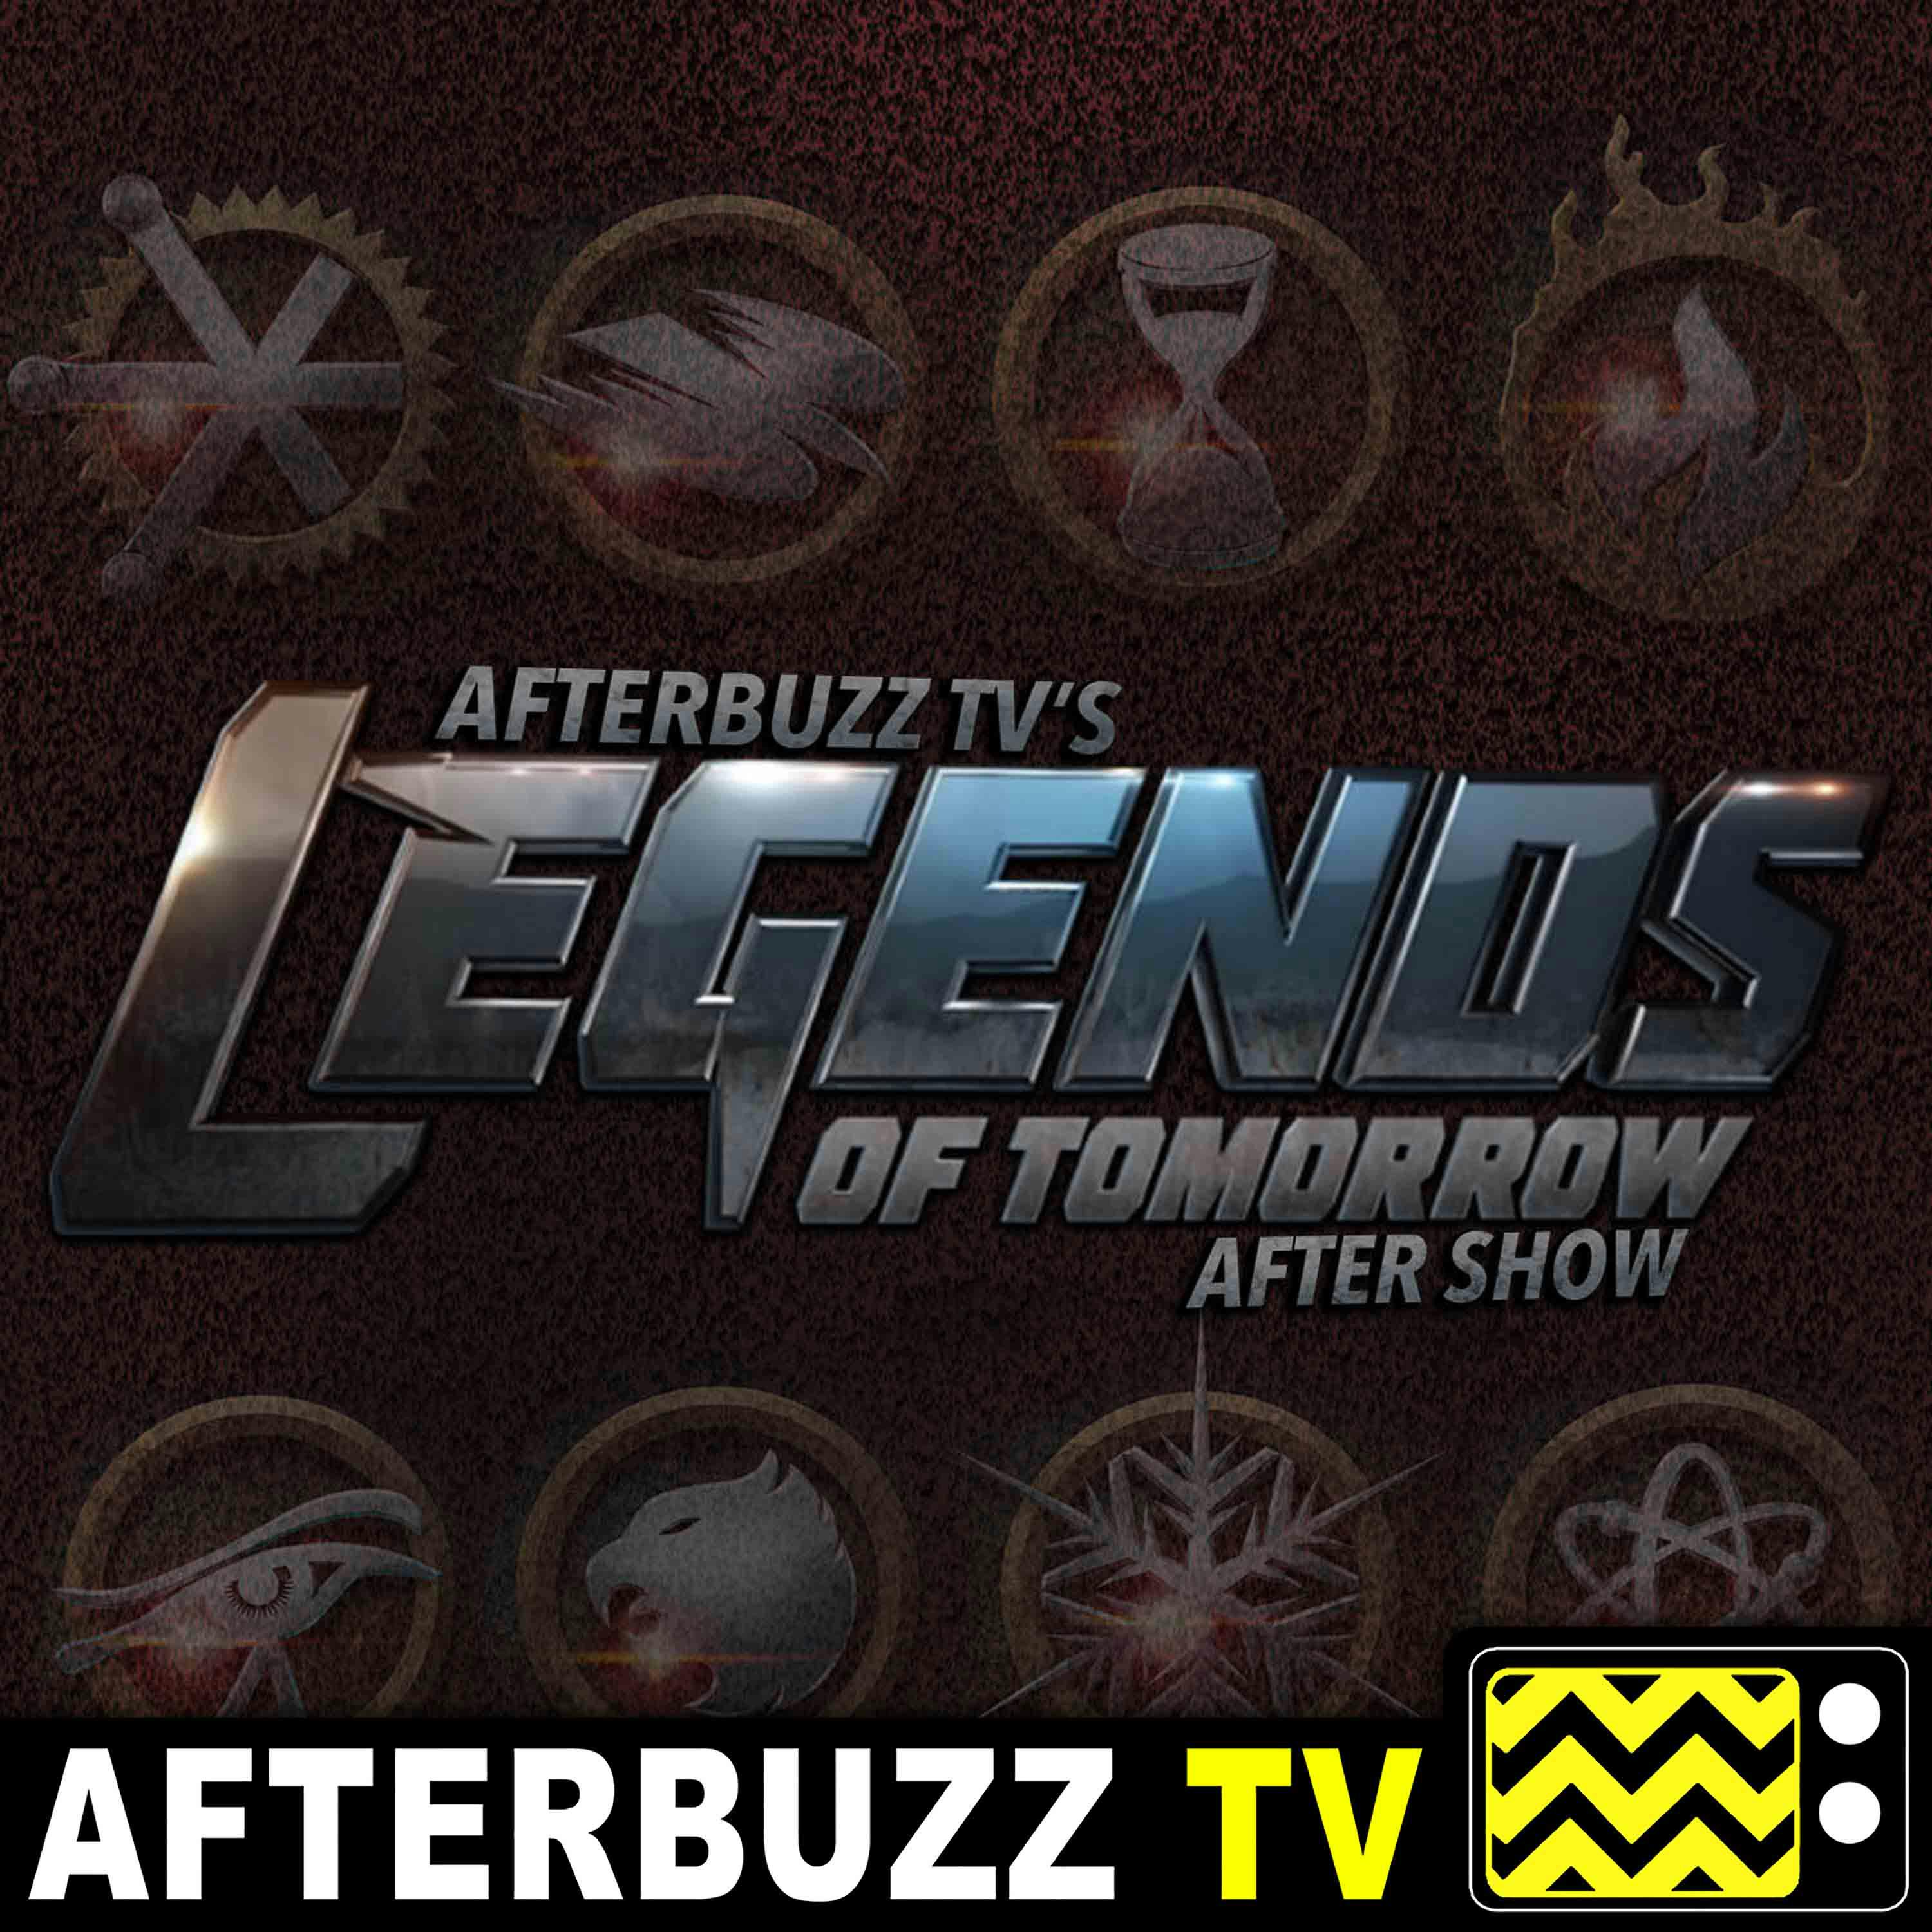 Legends Of Tomorrow S5 E11 Recap & After Show: Demon Dog Day Afternoon